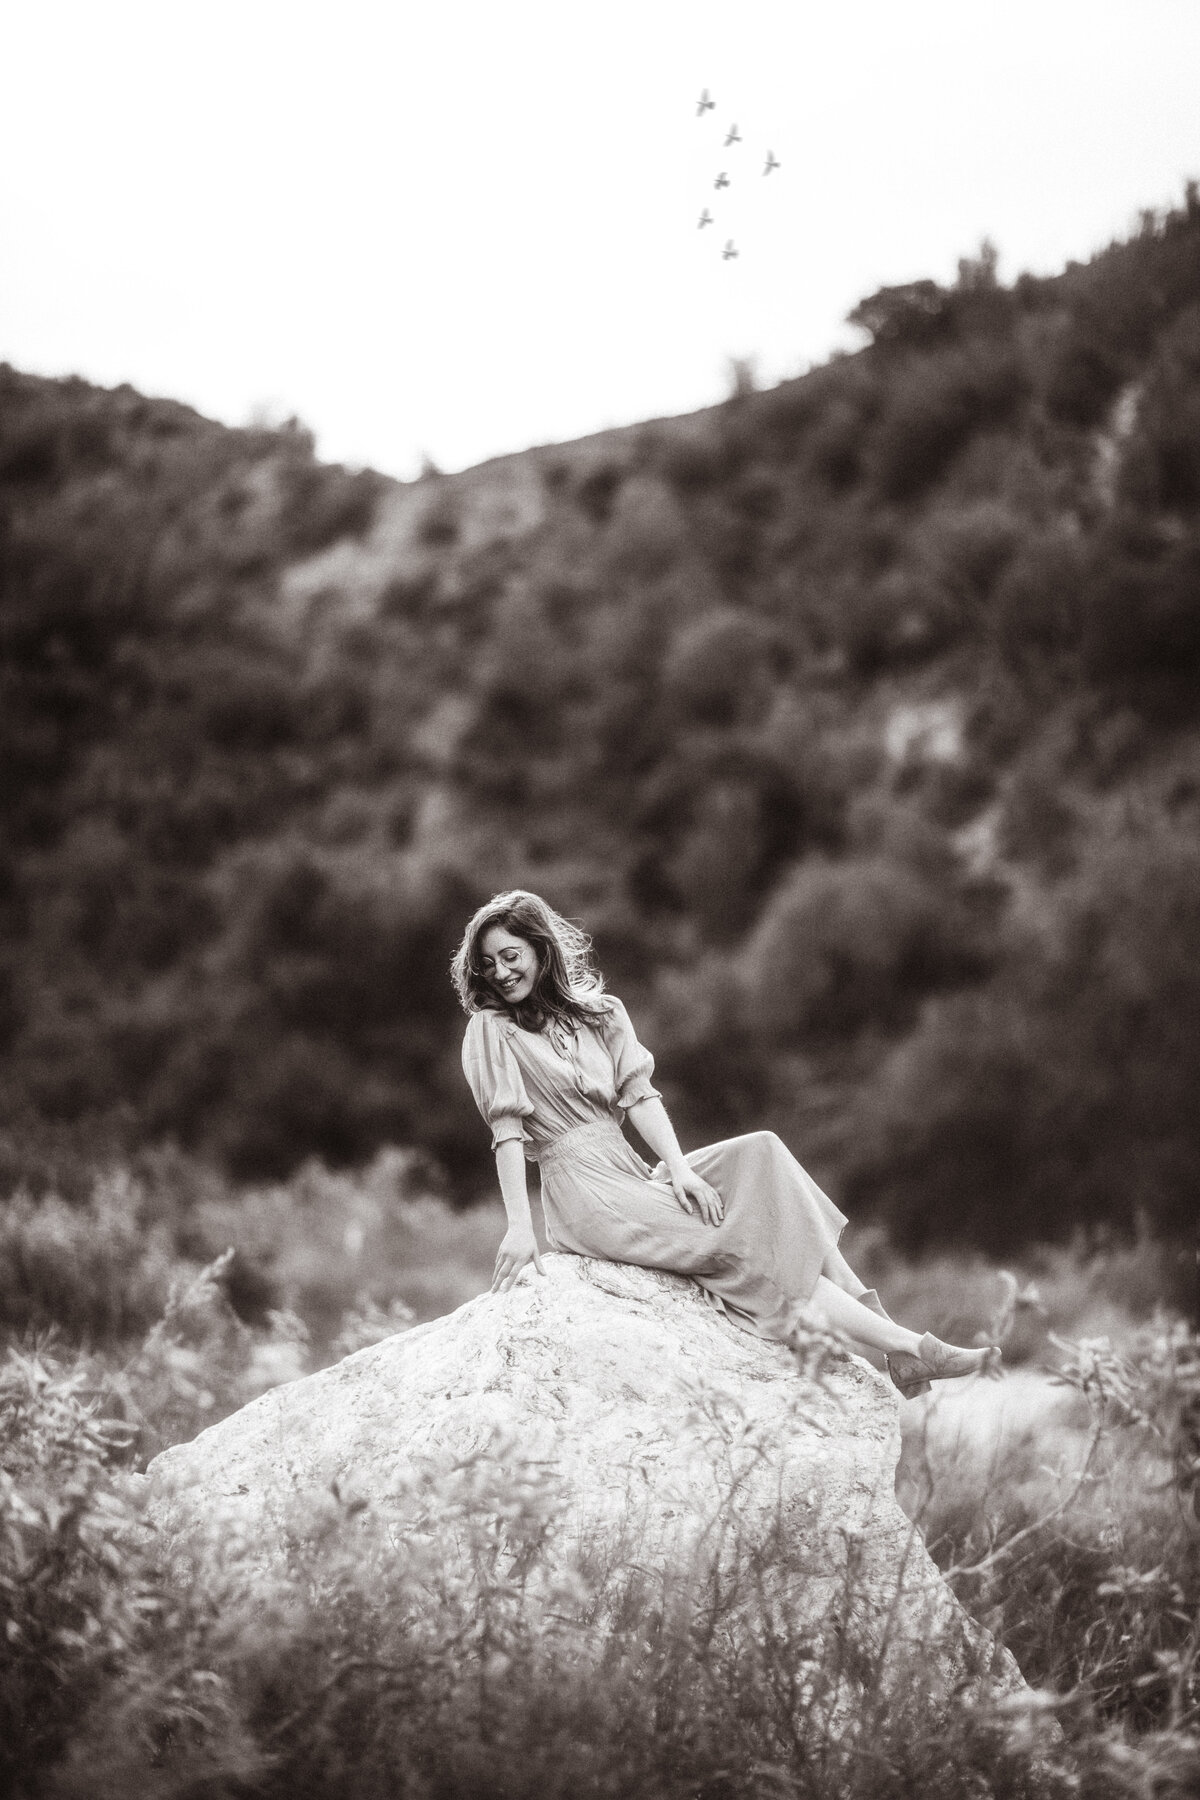 Portrait Photo Of Young Woman In Dress Seated On a Rock Black And White Los Angeles